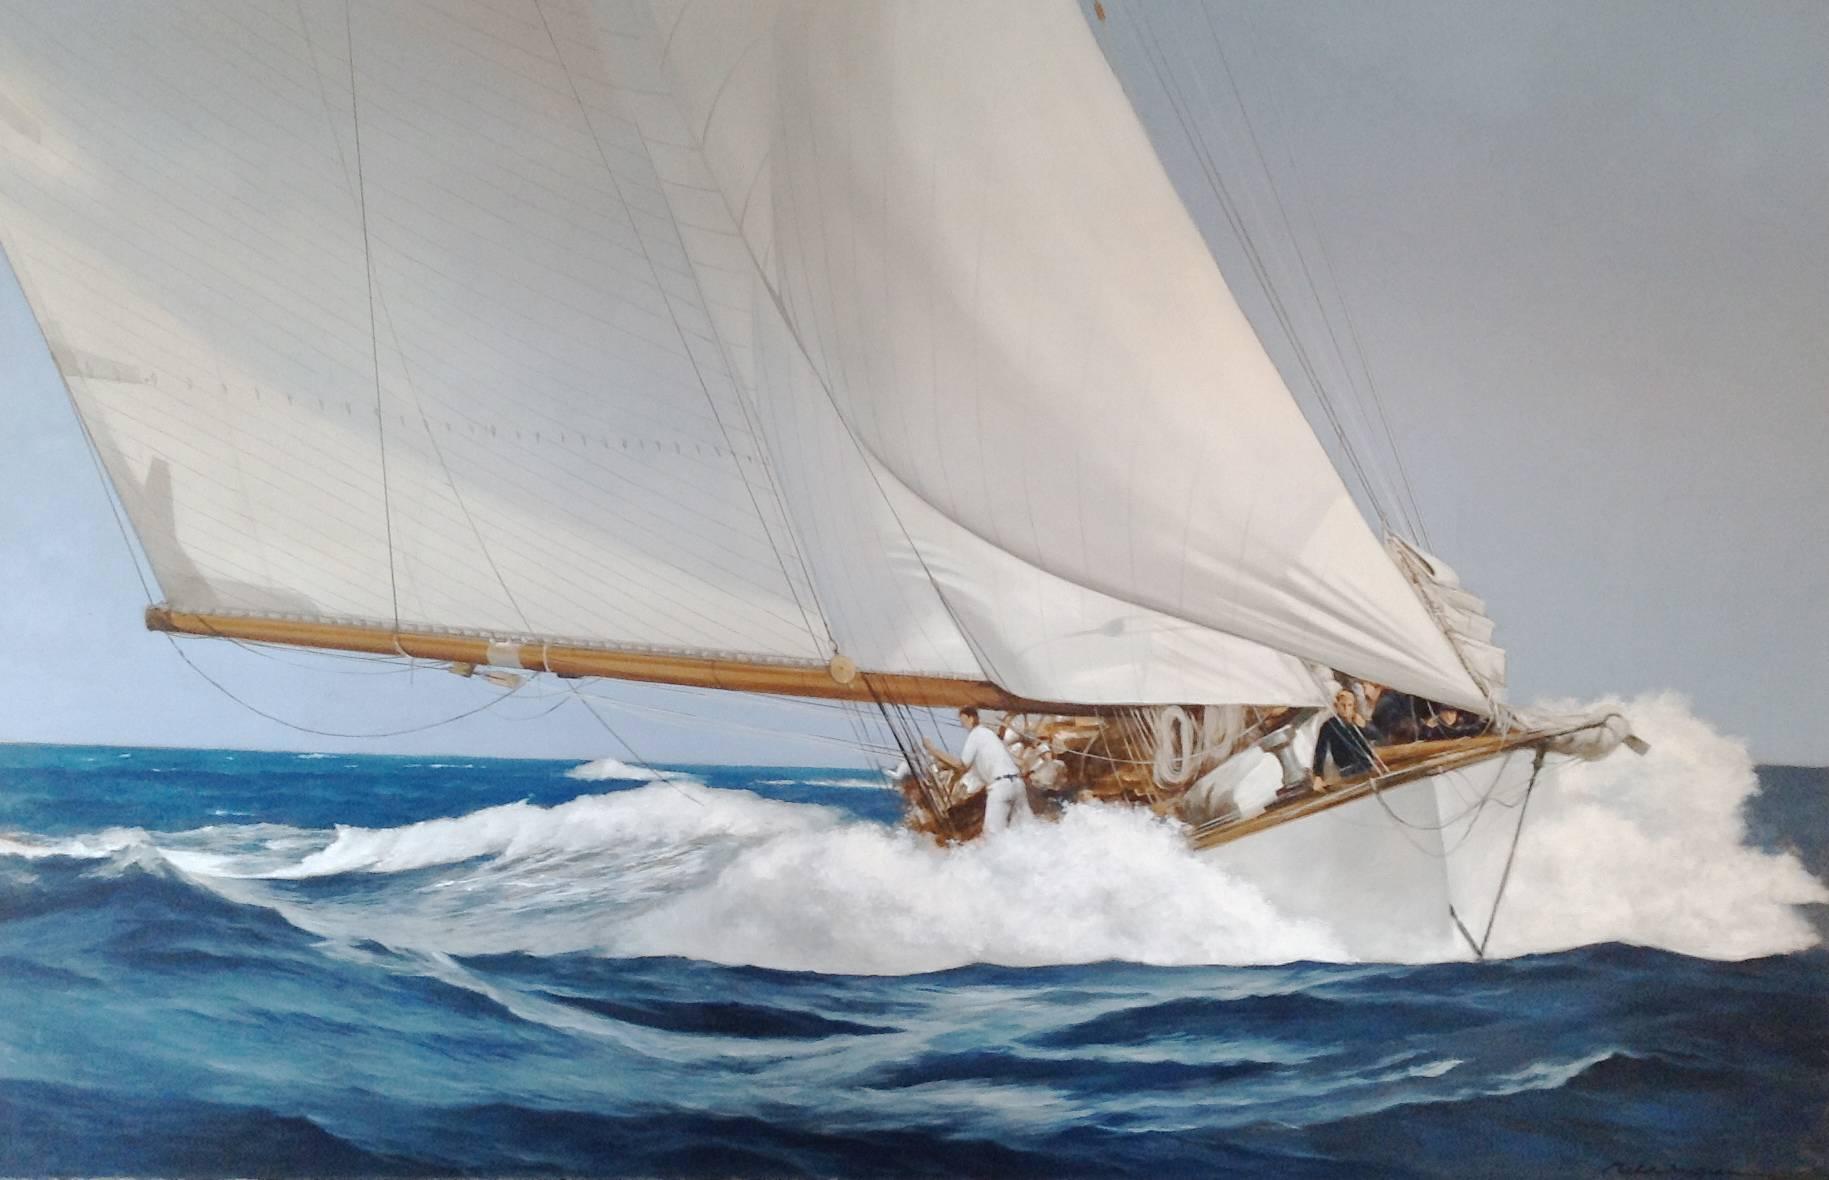 Michel Brosseau Landscape Painting - "Speed & Foam" Large oil painting of a wooden sailing yacht in deep blue waves